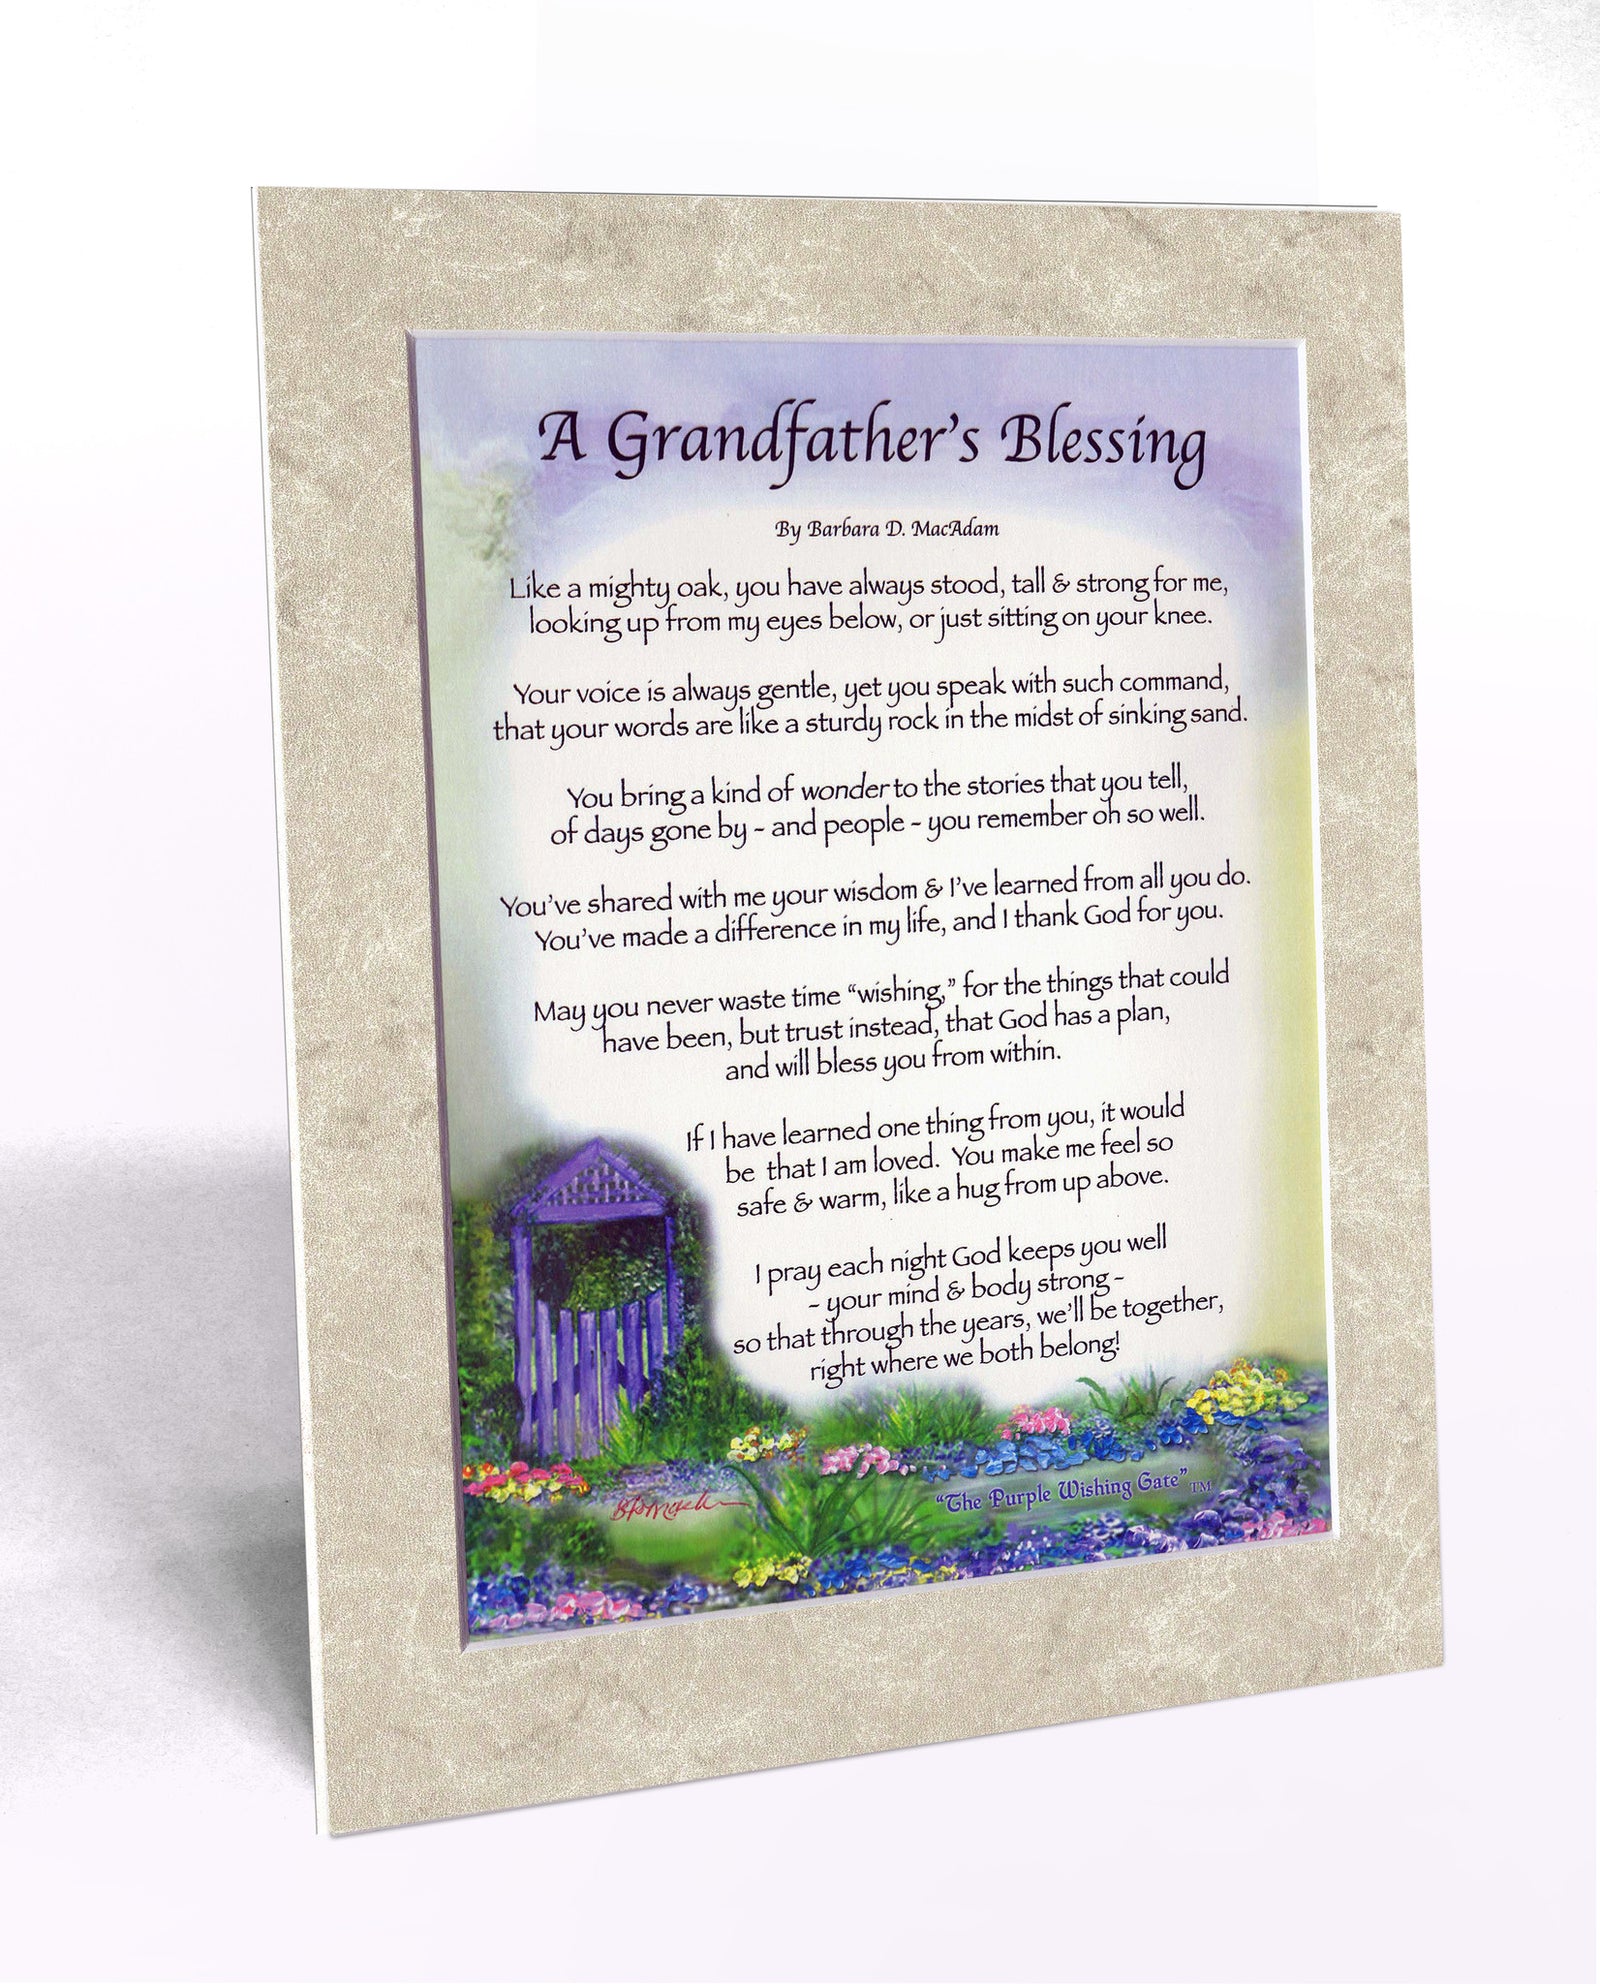 A Grandfather's Blessing (8x10) - 8x10 Custom Matted Clearance - PurpleWishingGate.com